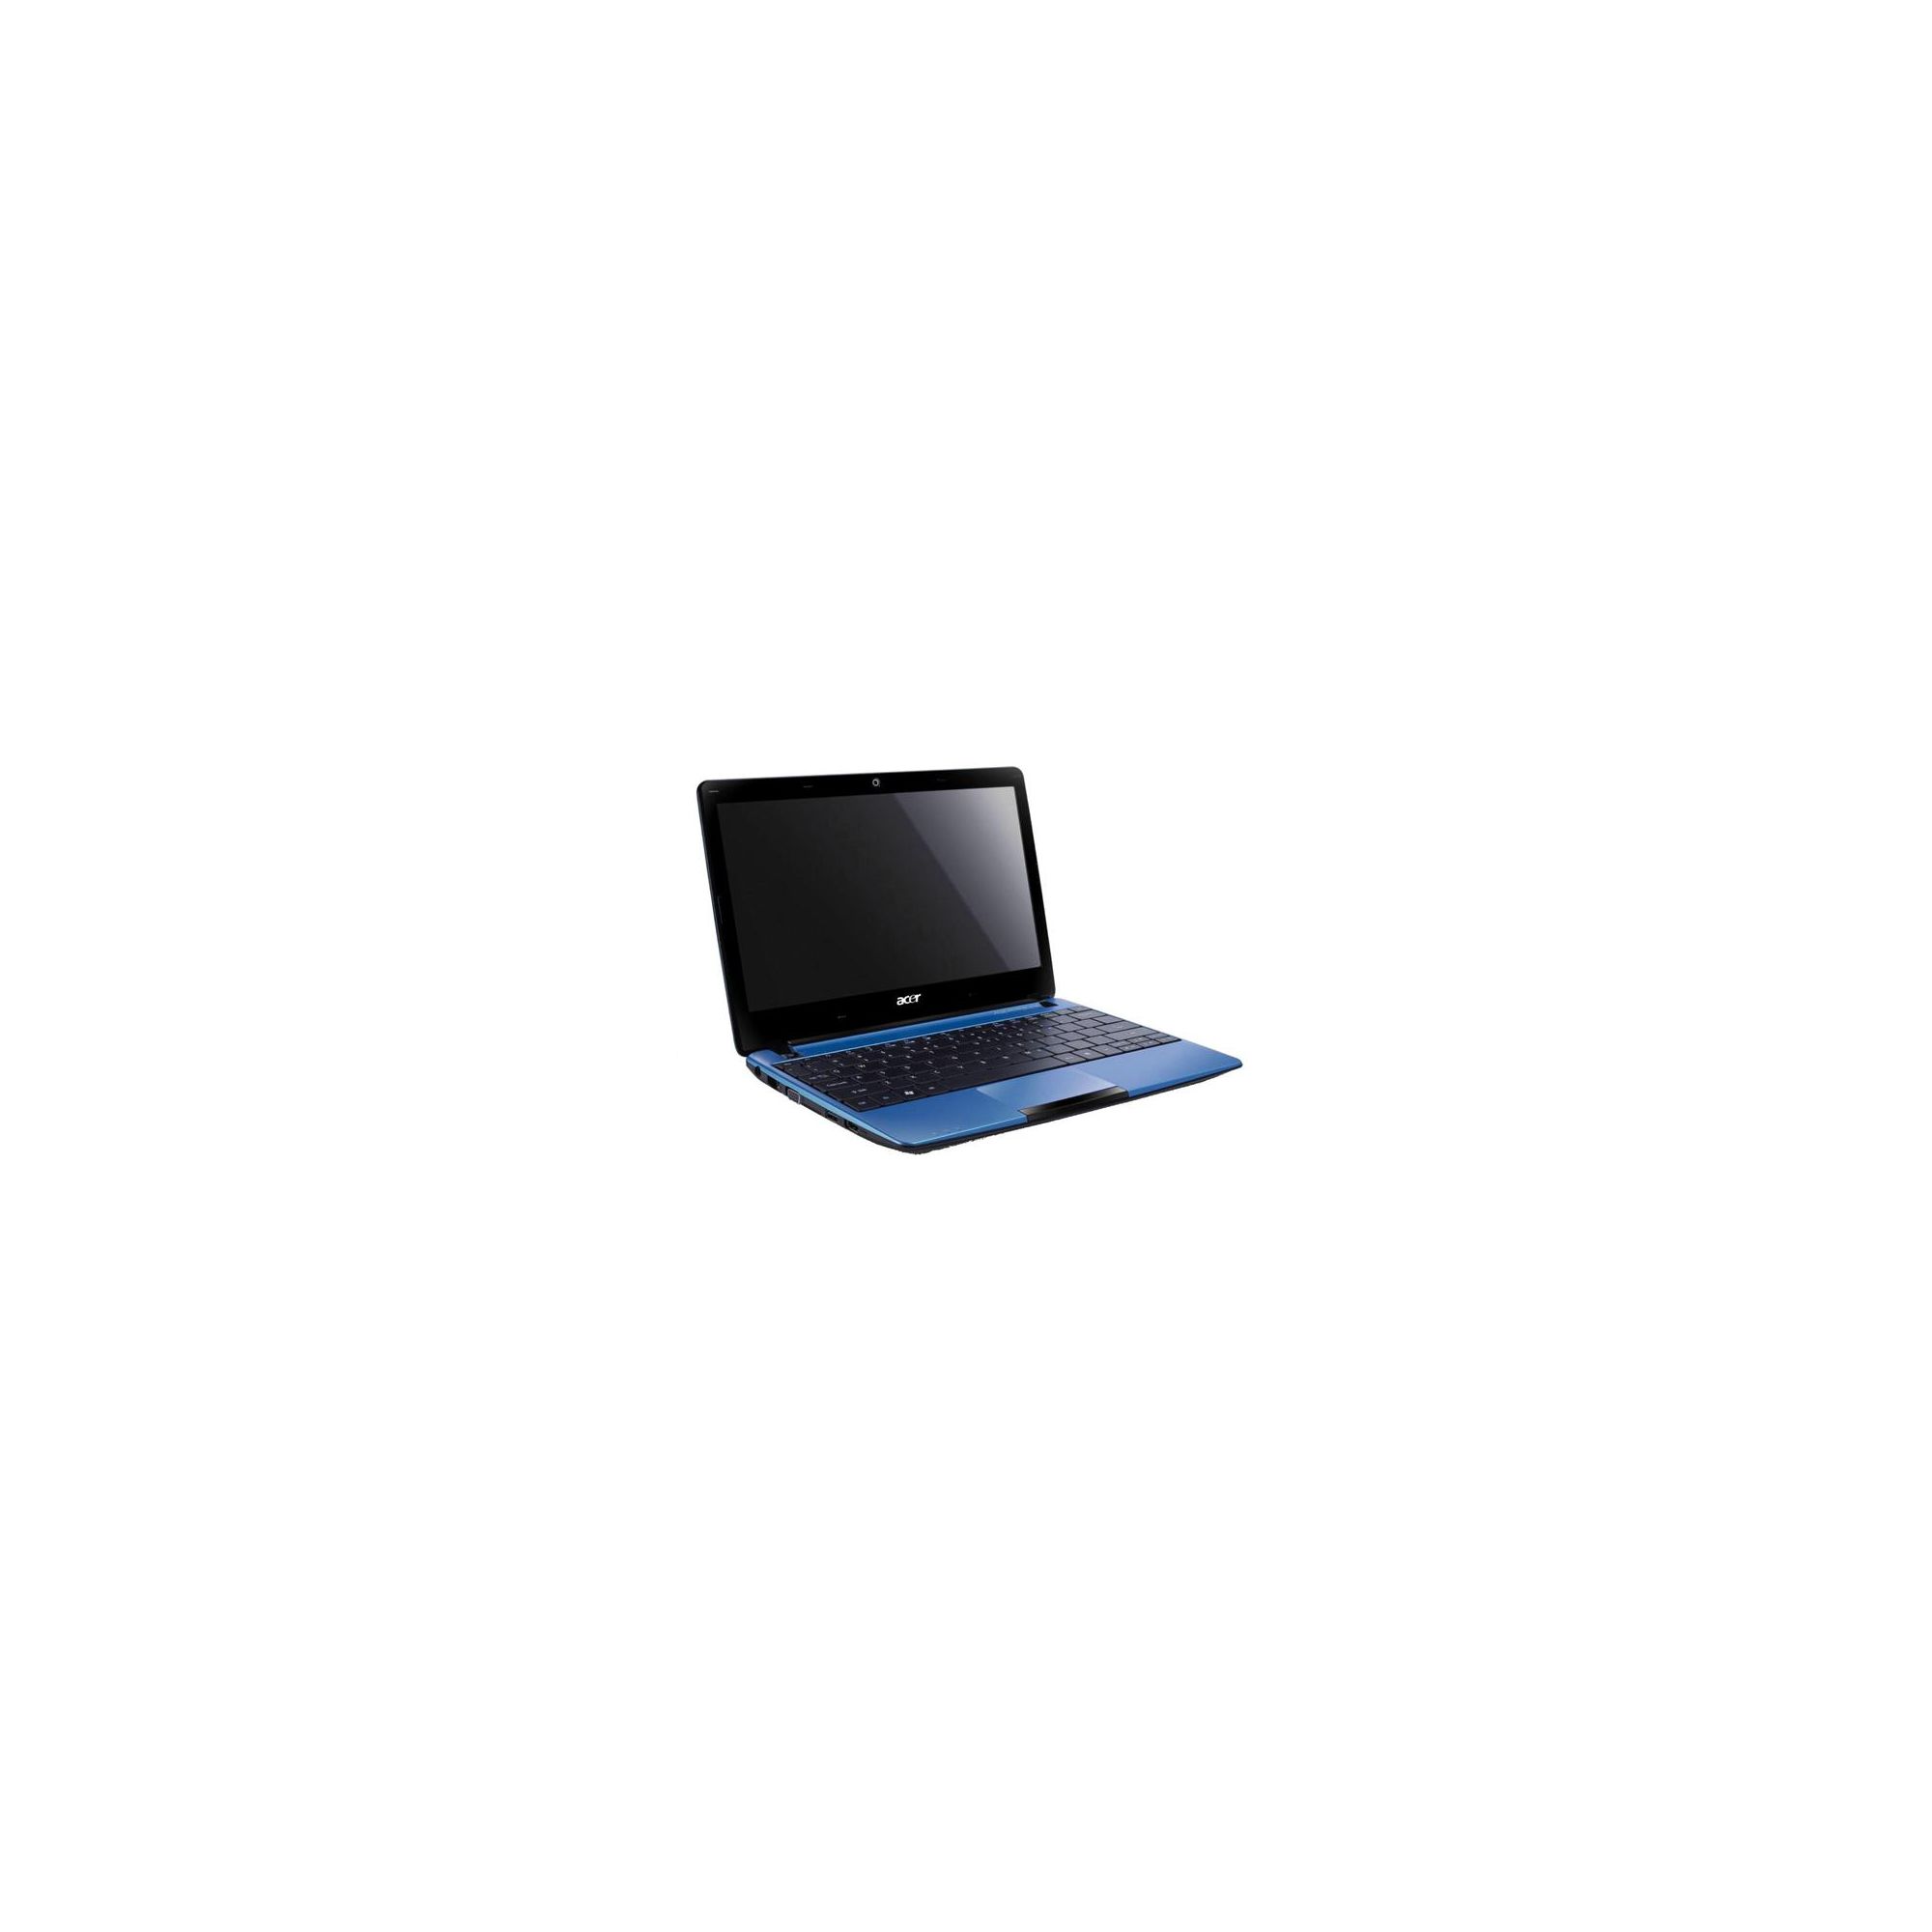 Acer Aspire One 722 Netbook (AMD C50, 2GB, 320GB, 11.6'' Display) Blue at Tesco Direct